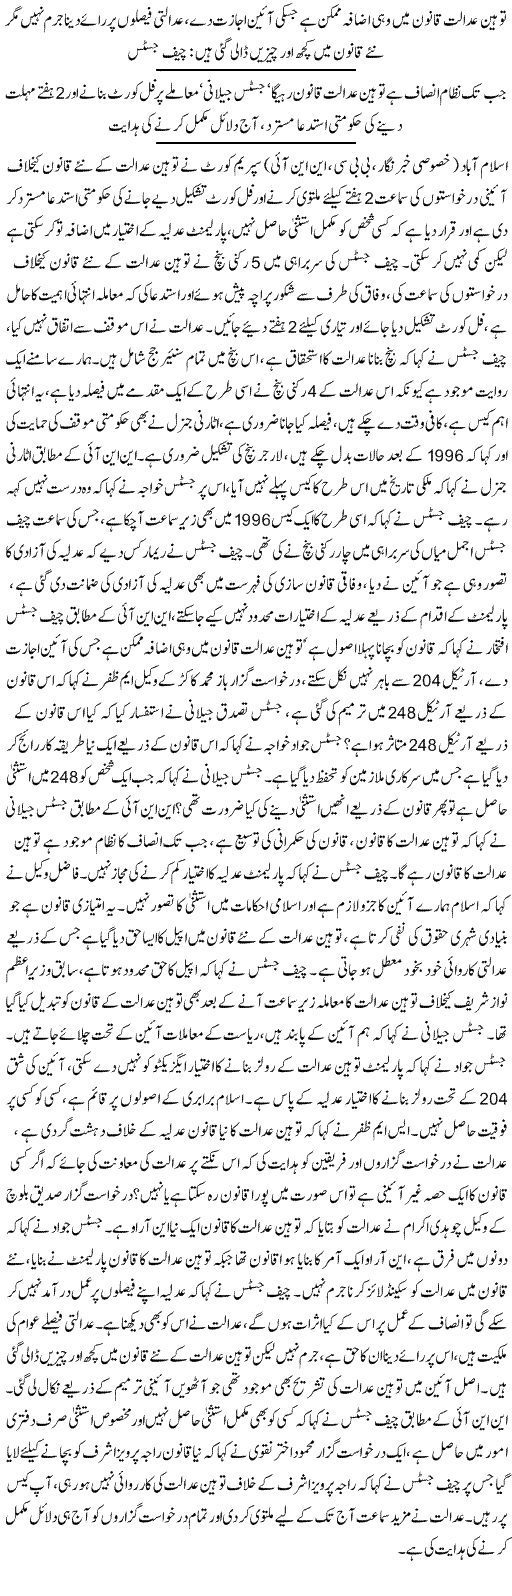 Parliament Can't Reduce Our Rights: Supreme Court - News in Urdu